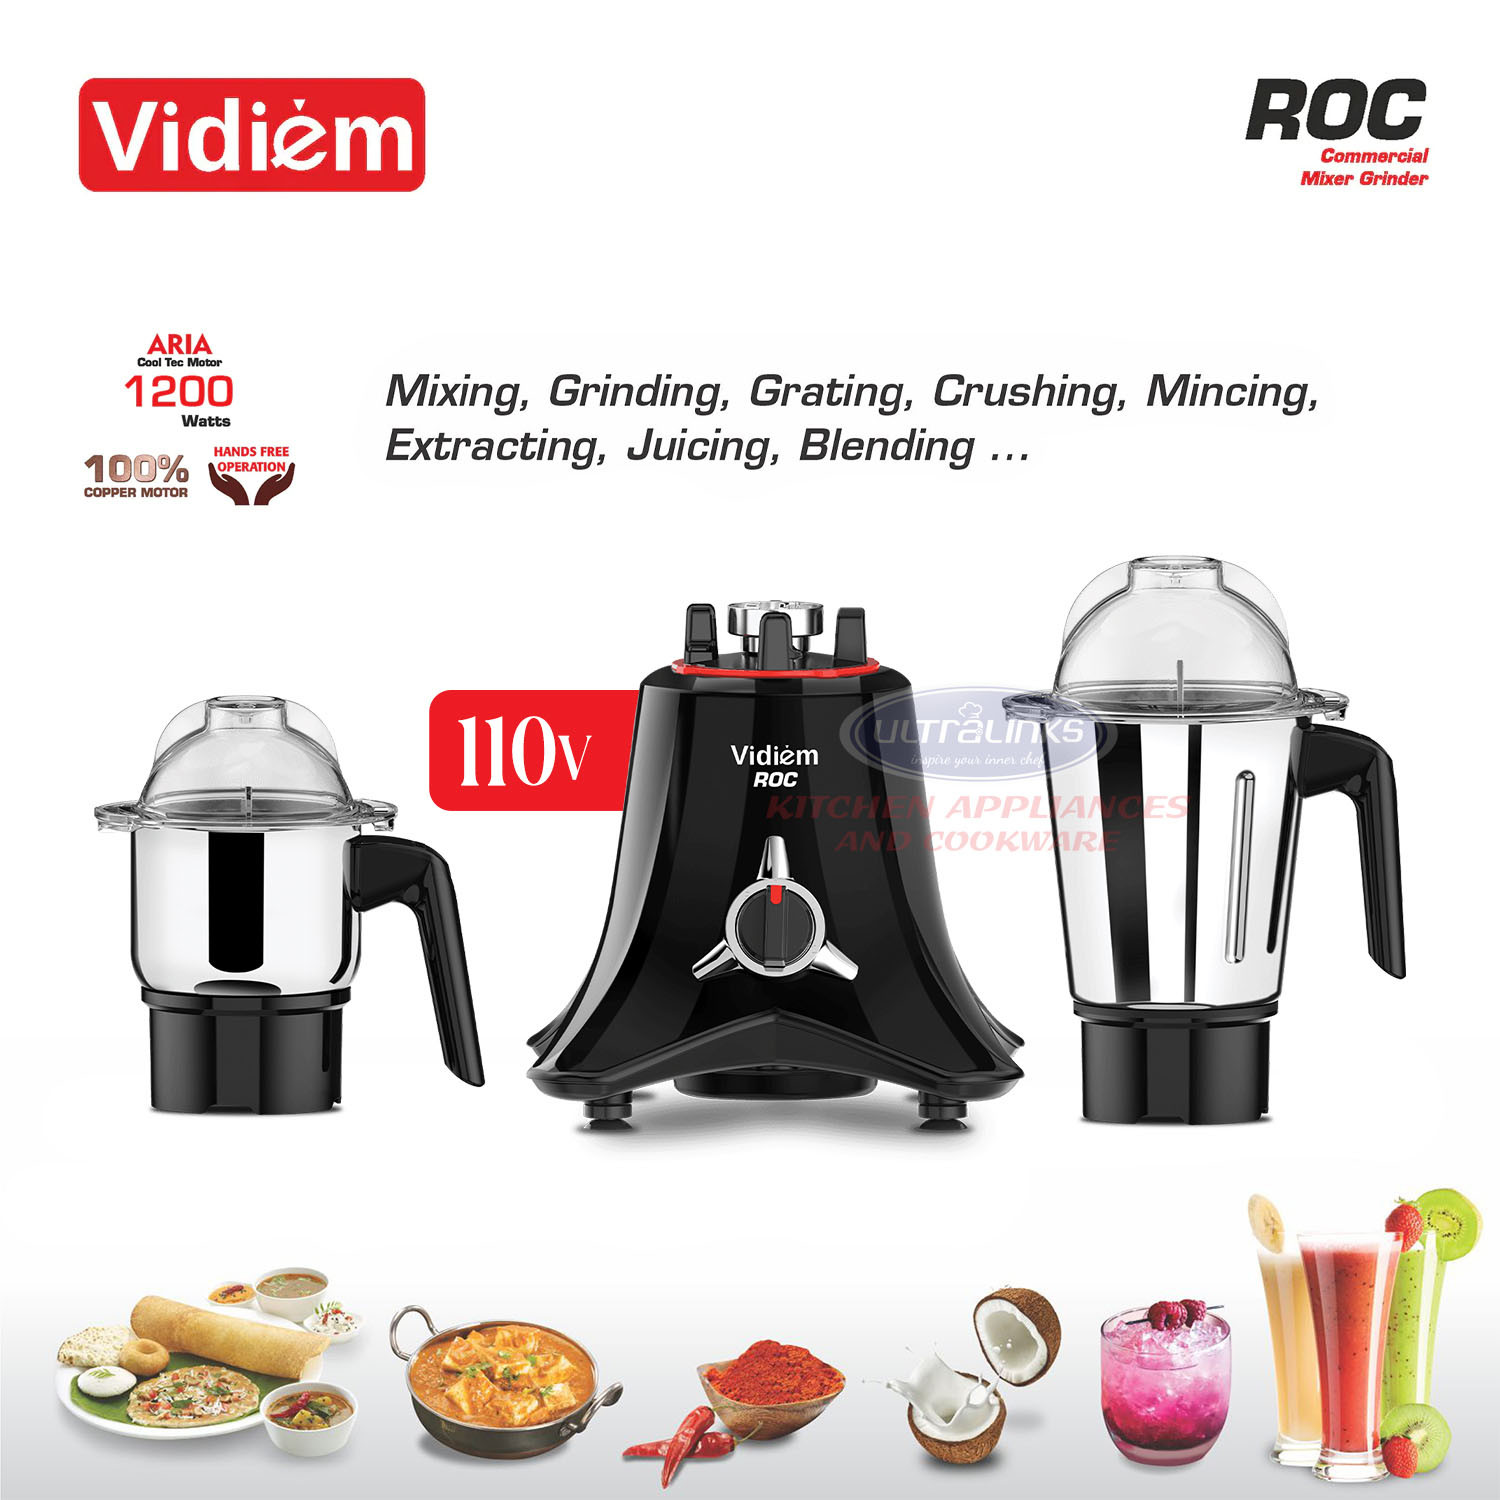 vidiem-roc-1200w-110v-commercial-residential-mixer-grinder-stainless-steel-jars-indian-mixer-grinder-spice-coffee-grinder-jar-for-use-in-canada-usa